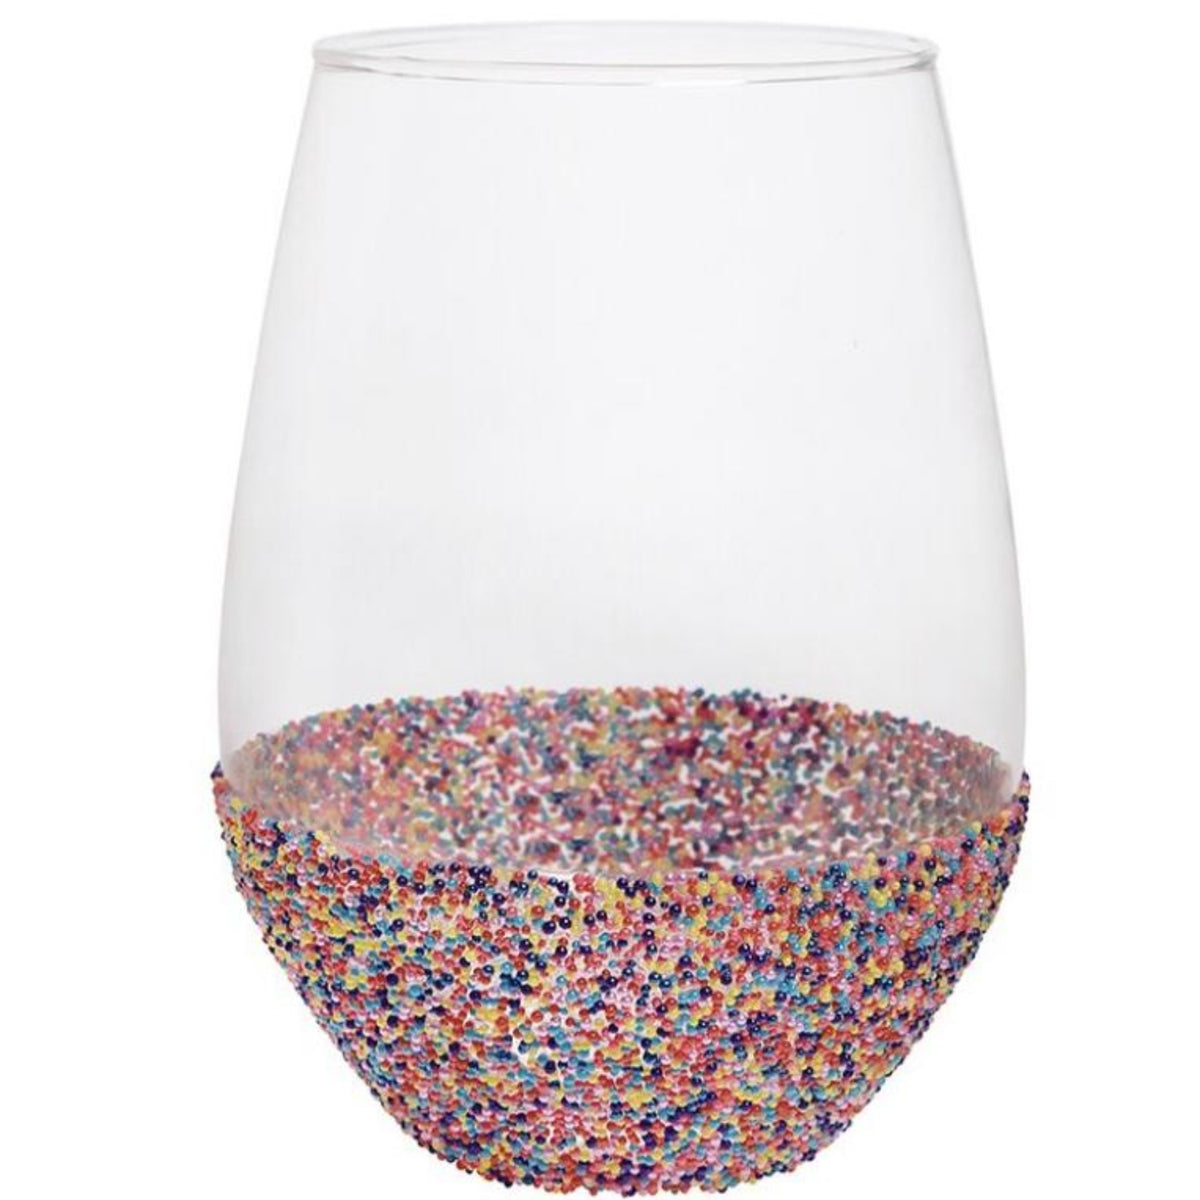 Stemless Wine Glass with Beads